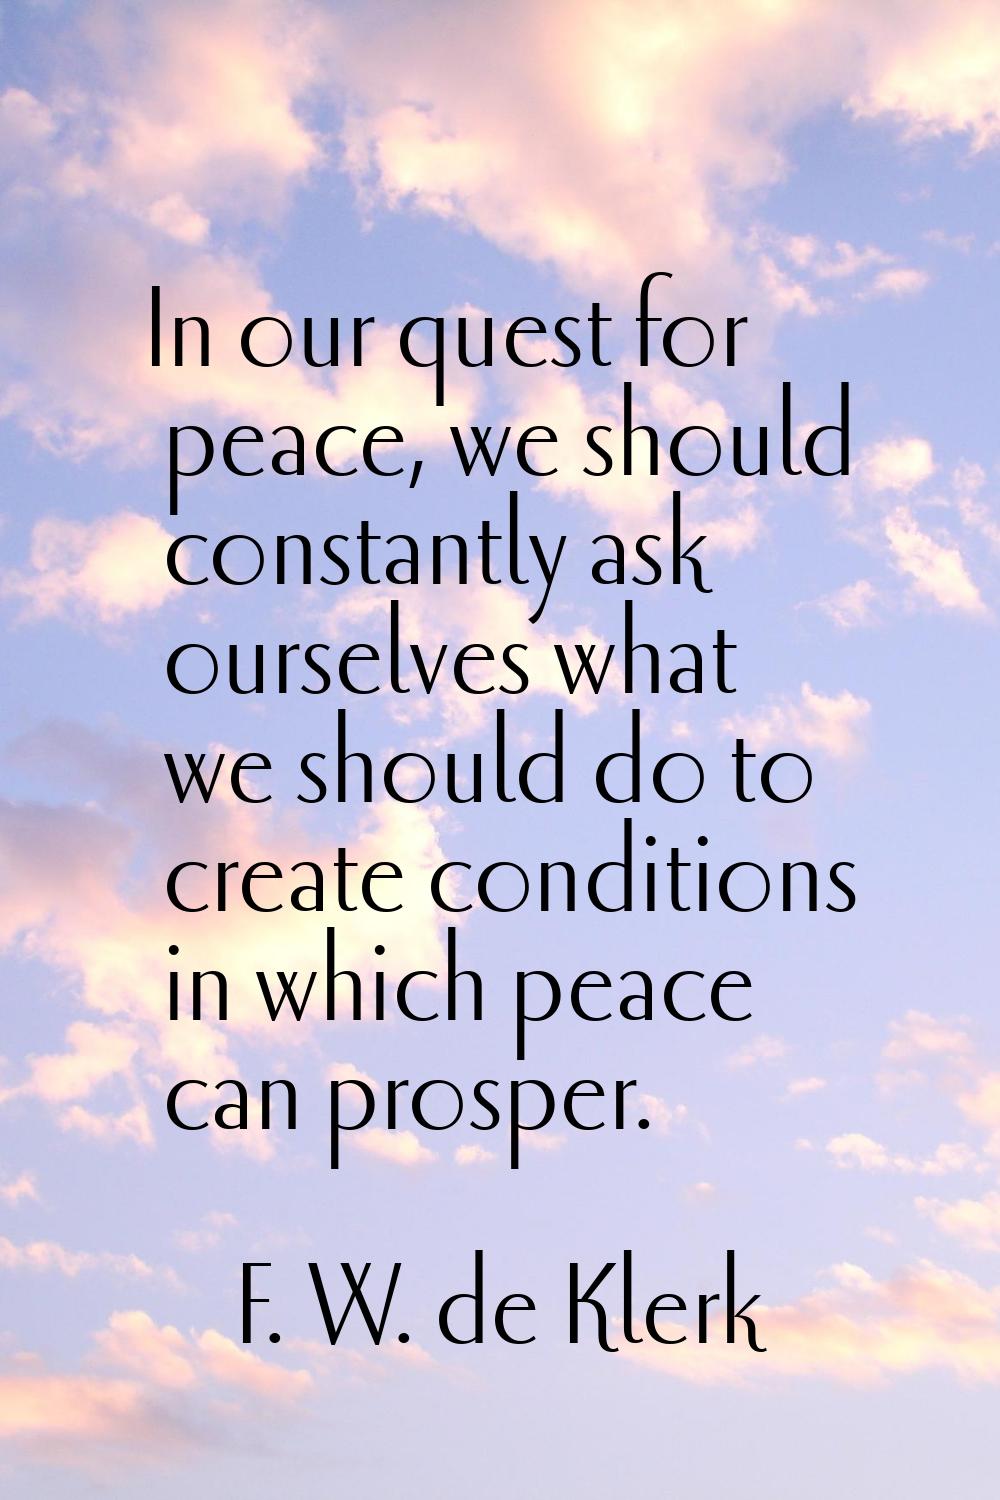 In our quest for peace, we should constantly ask ourselves what we should do to create conditions i